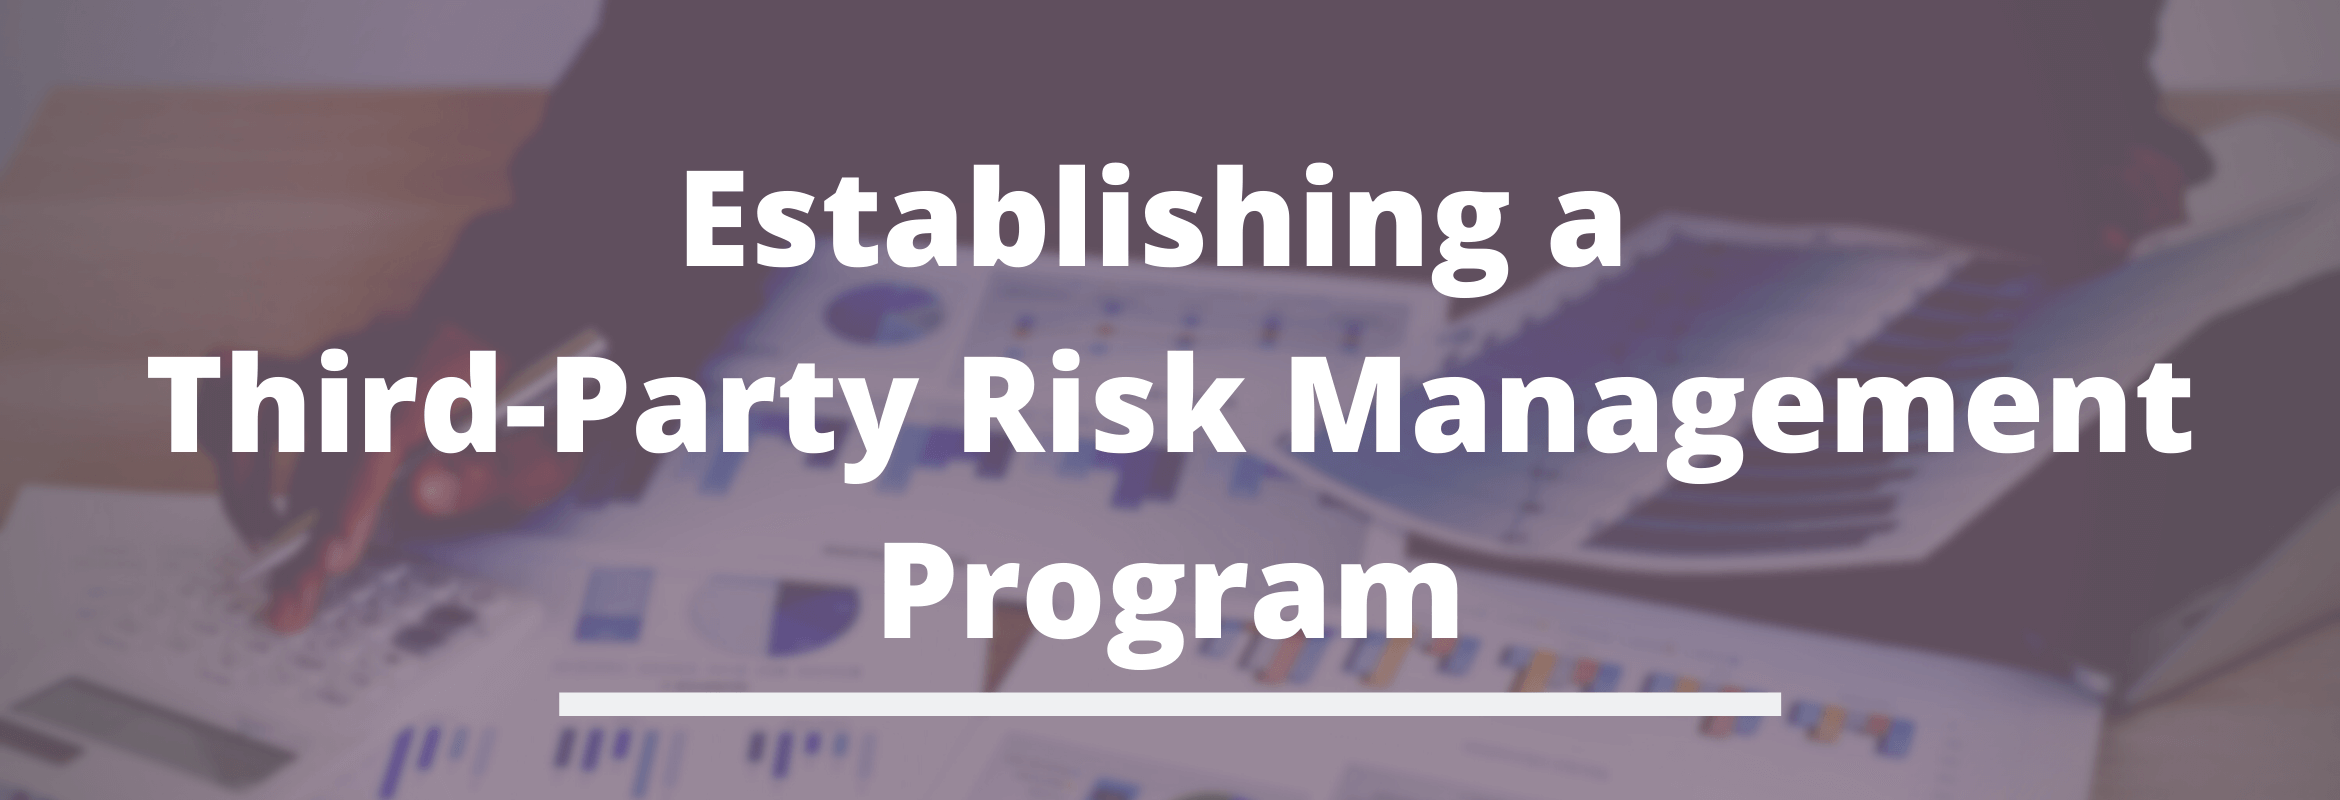 Image of Third-Party Risk Management 